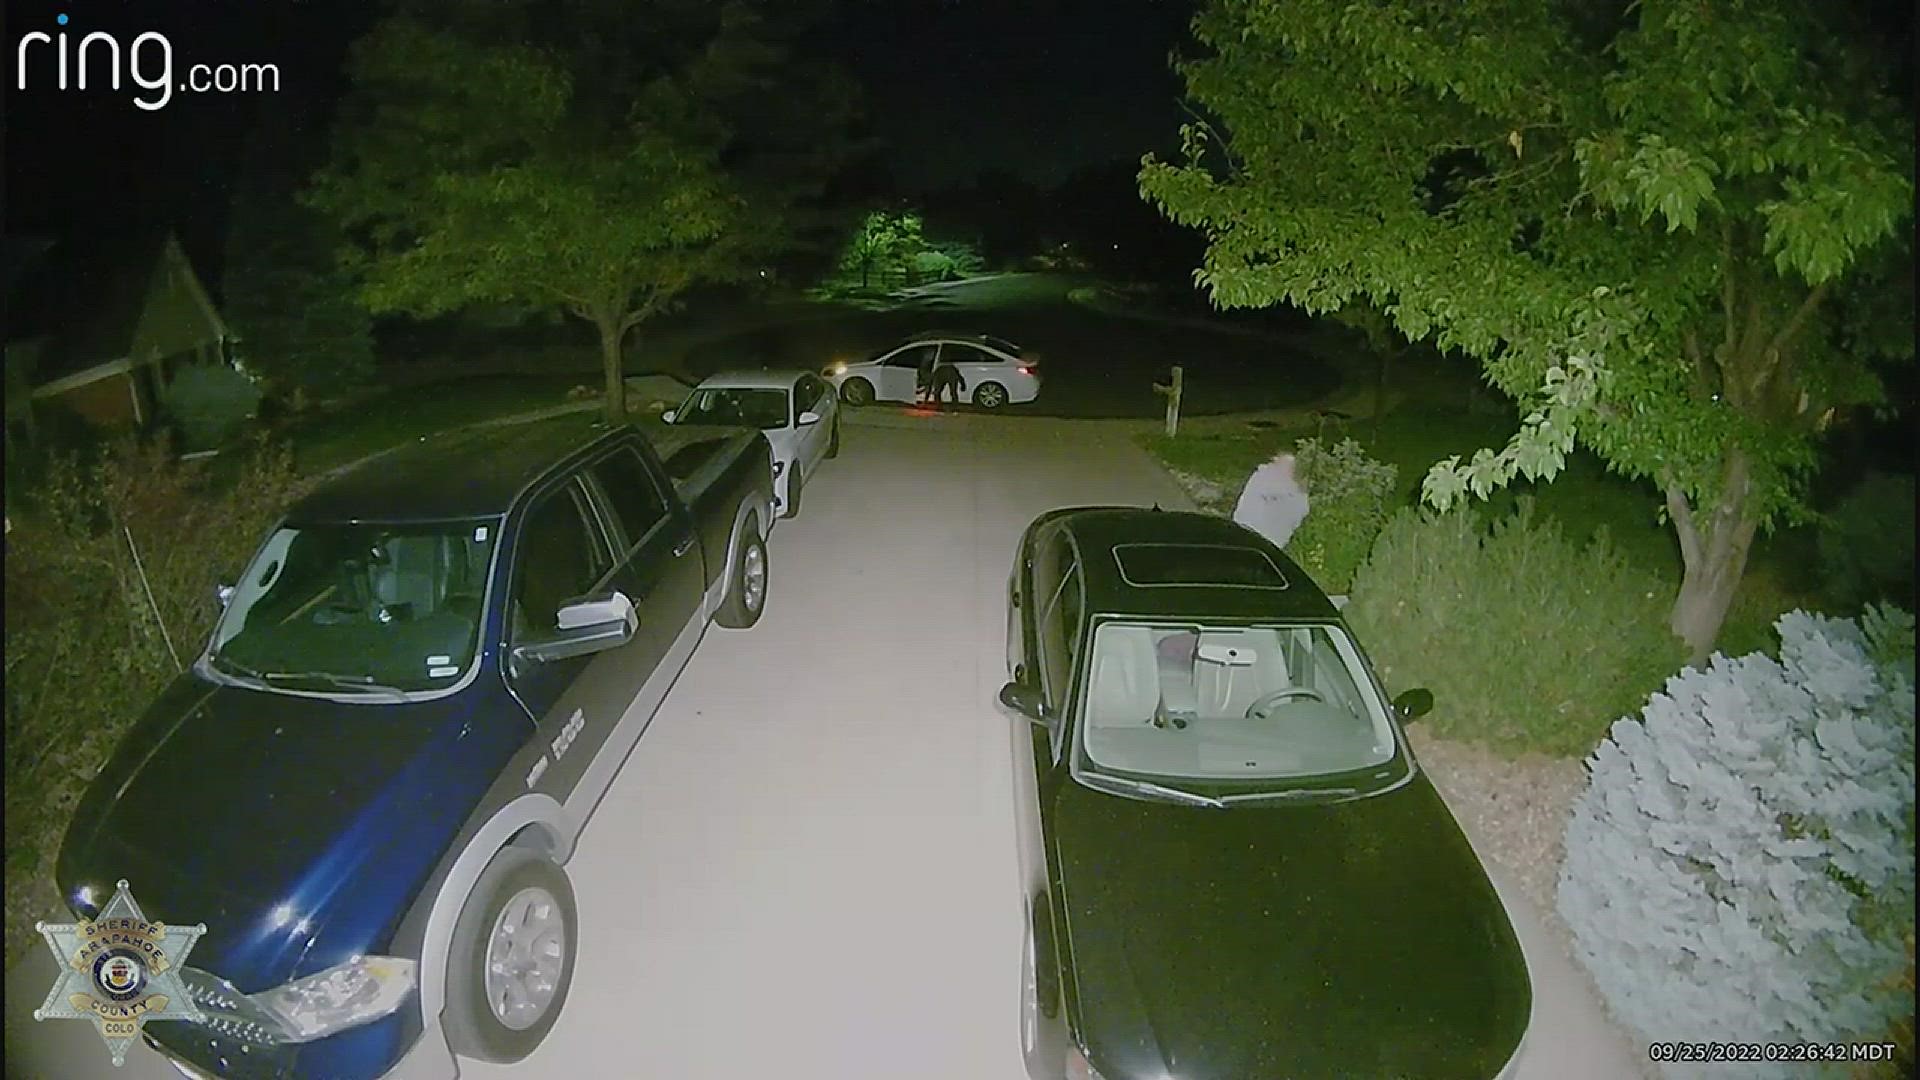 The theft occurred on East Caley Place in Centennial around 2:30 a.m. on Sept. 25.